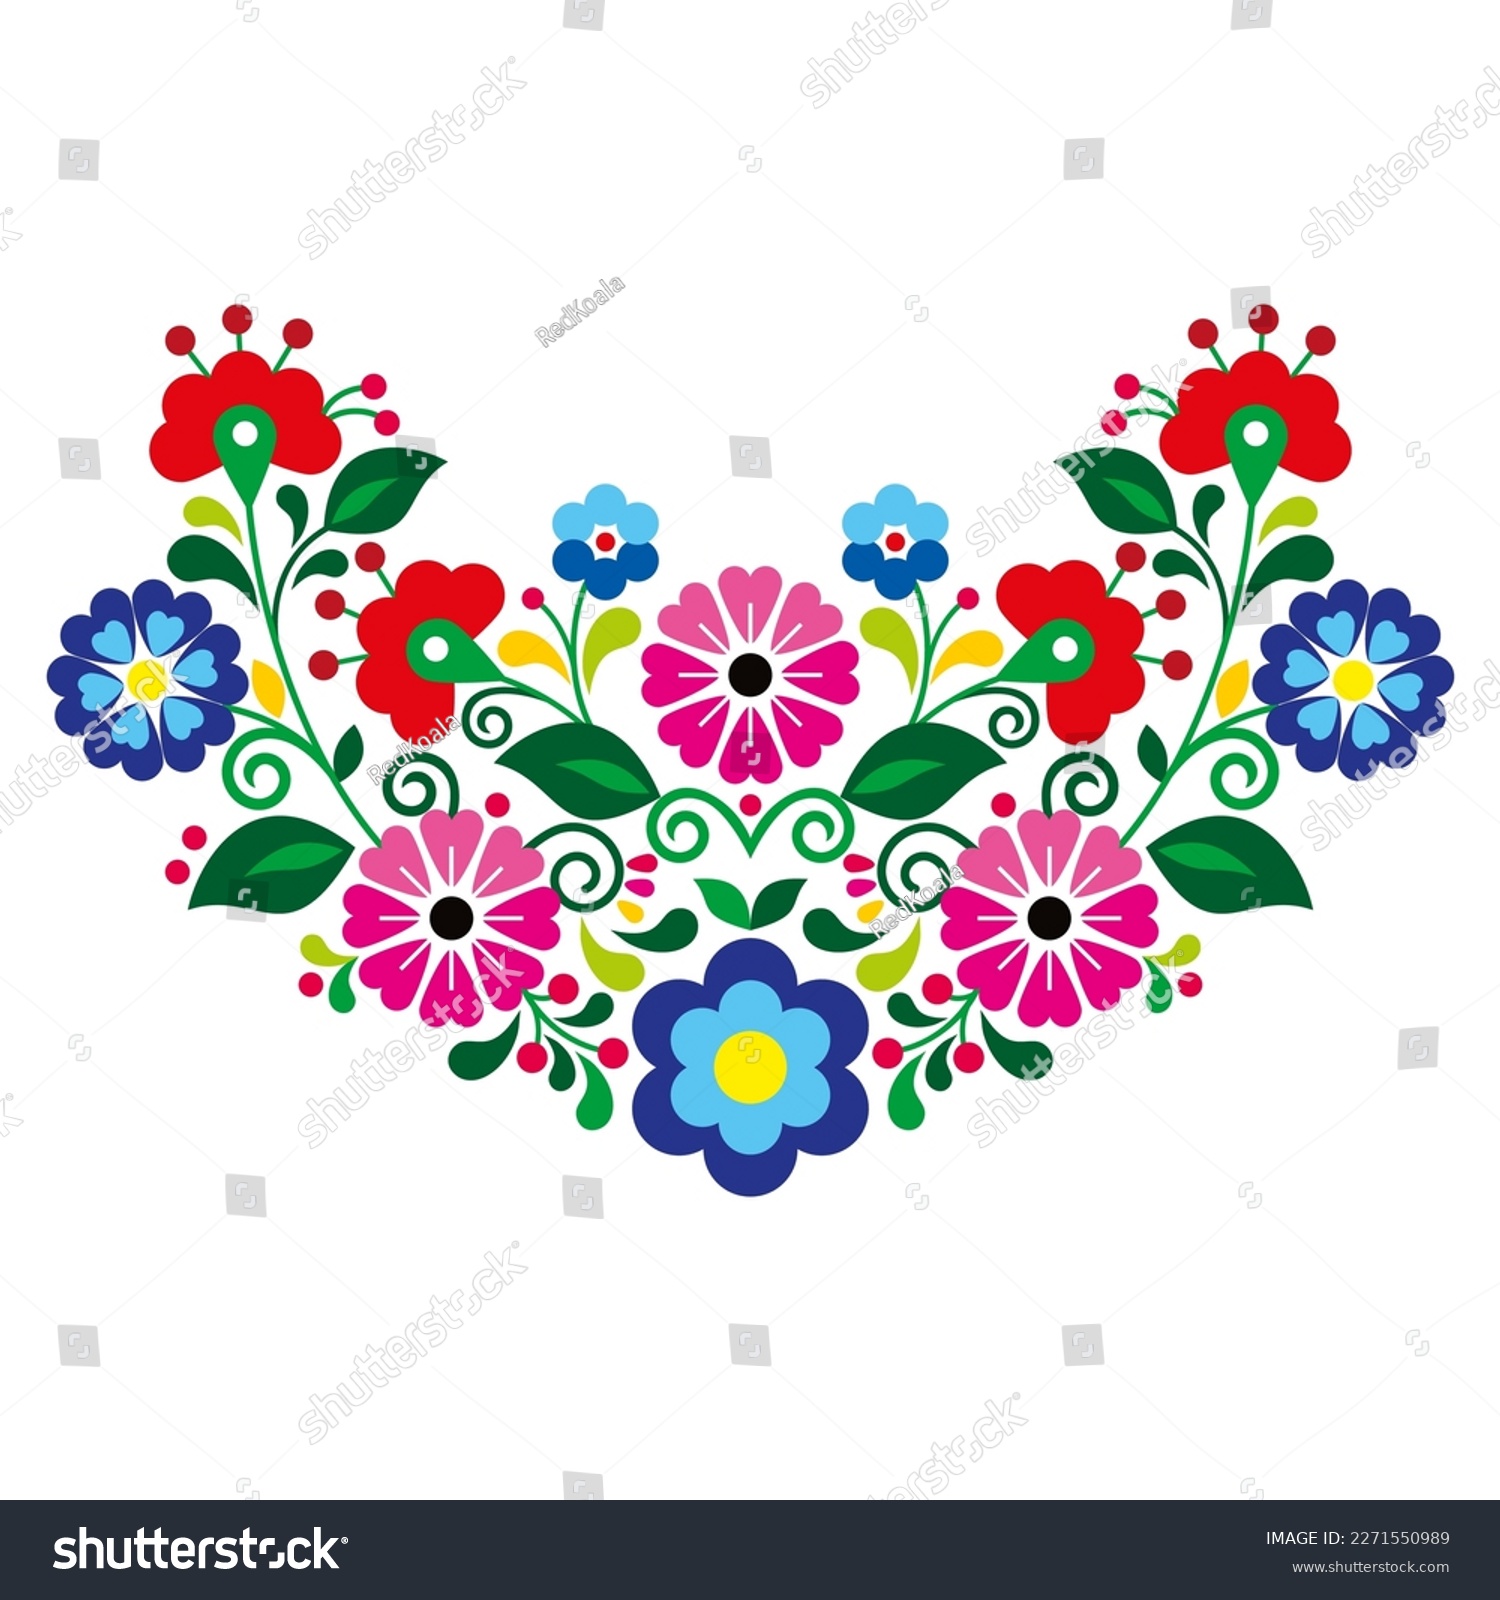 SVG of Mexican vibrant folk art style vector pattern with flowers, half wreath shaped floral design inspired by traditional embroidery from Mexico. Decorative ornament with vibrant flowers, leaves and swirls svg